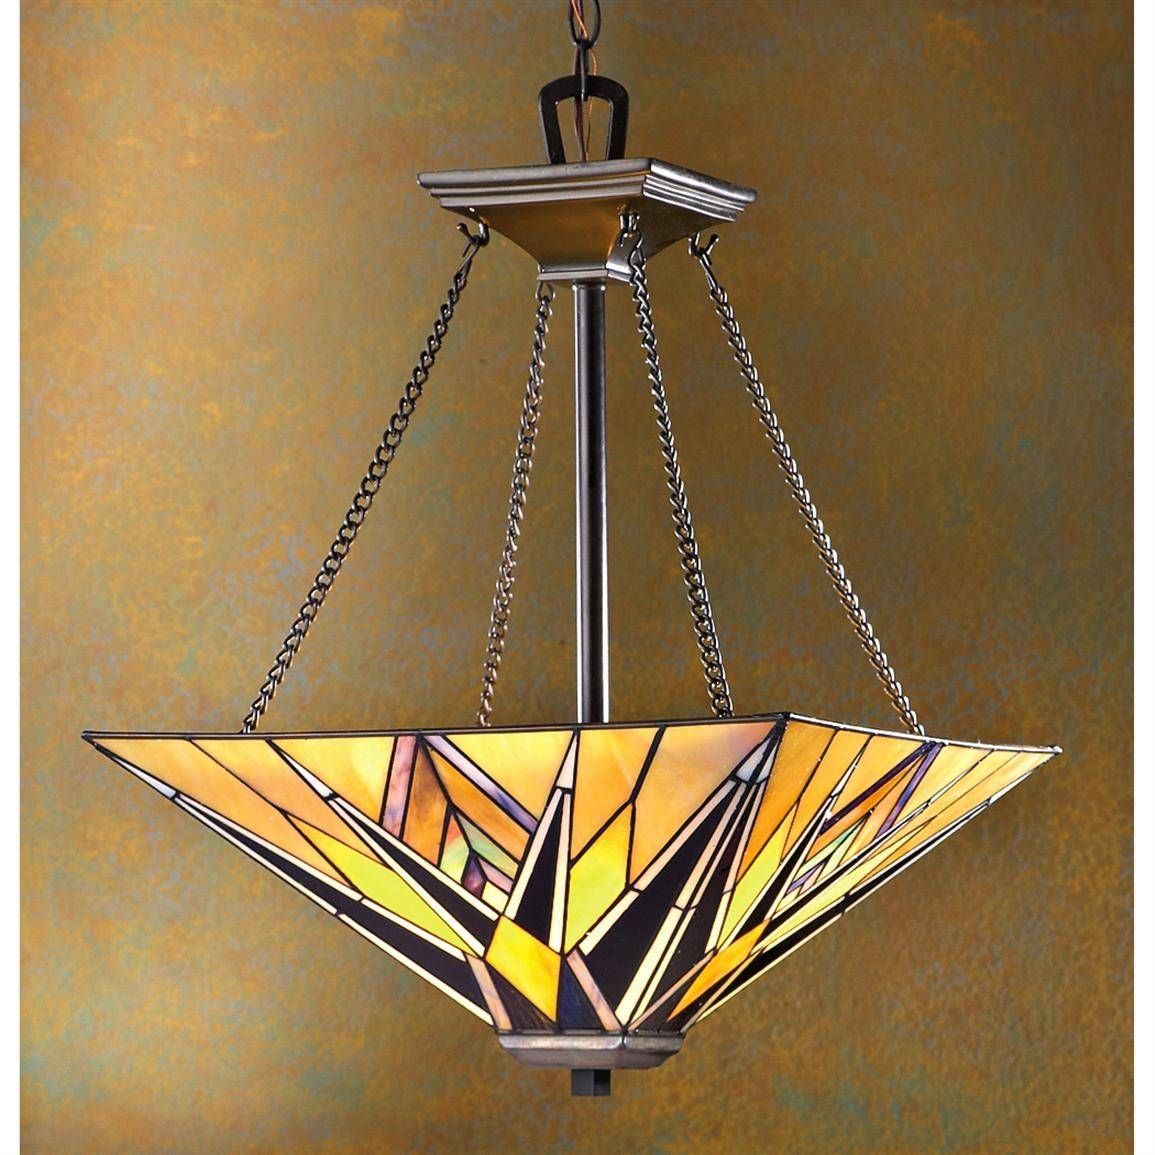 Tiffany Style Ceiling Light – Baby Exit Regarding Tiffany Pendant Light Fixtures (View 15 of 15)